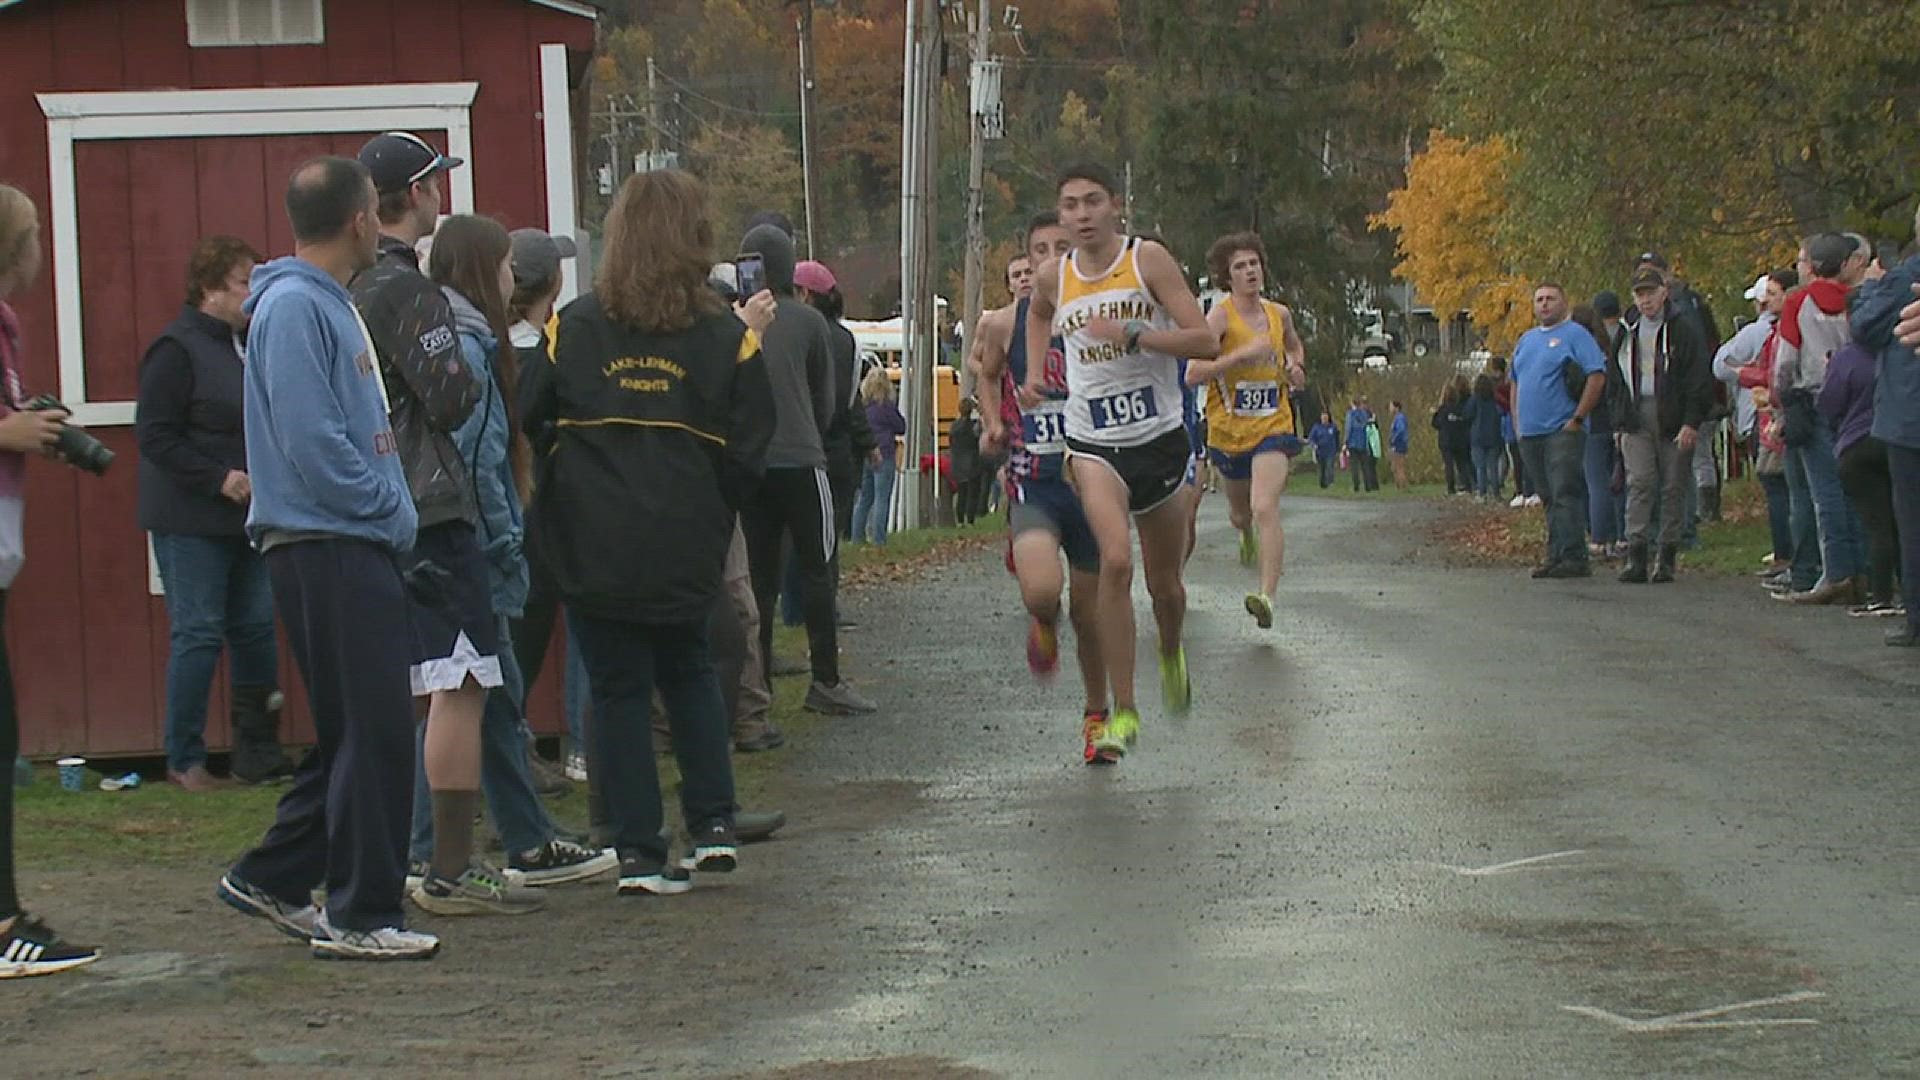 McCormack wins the "3A" race for the Knights